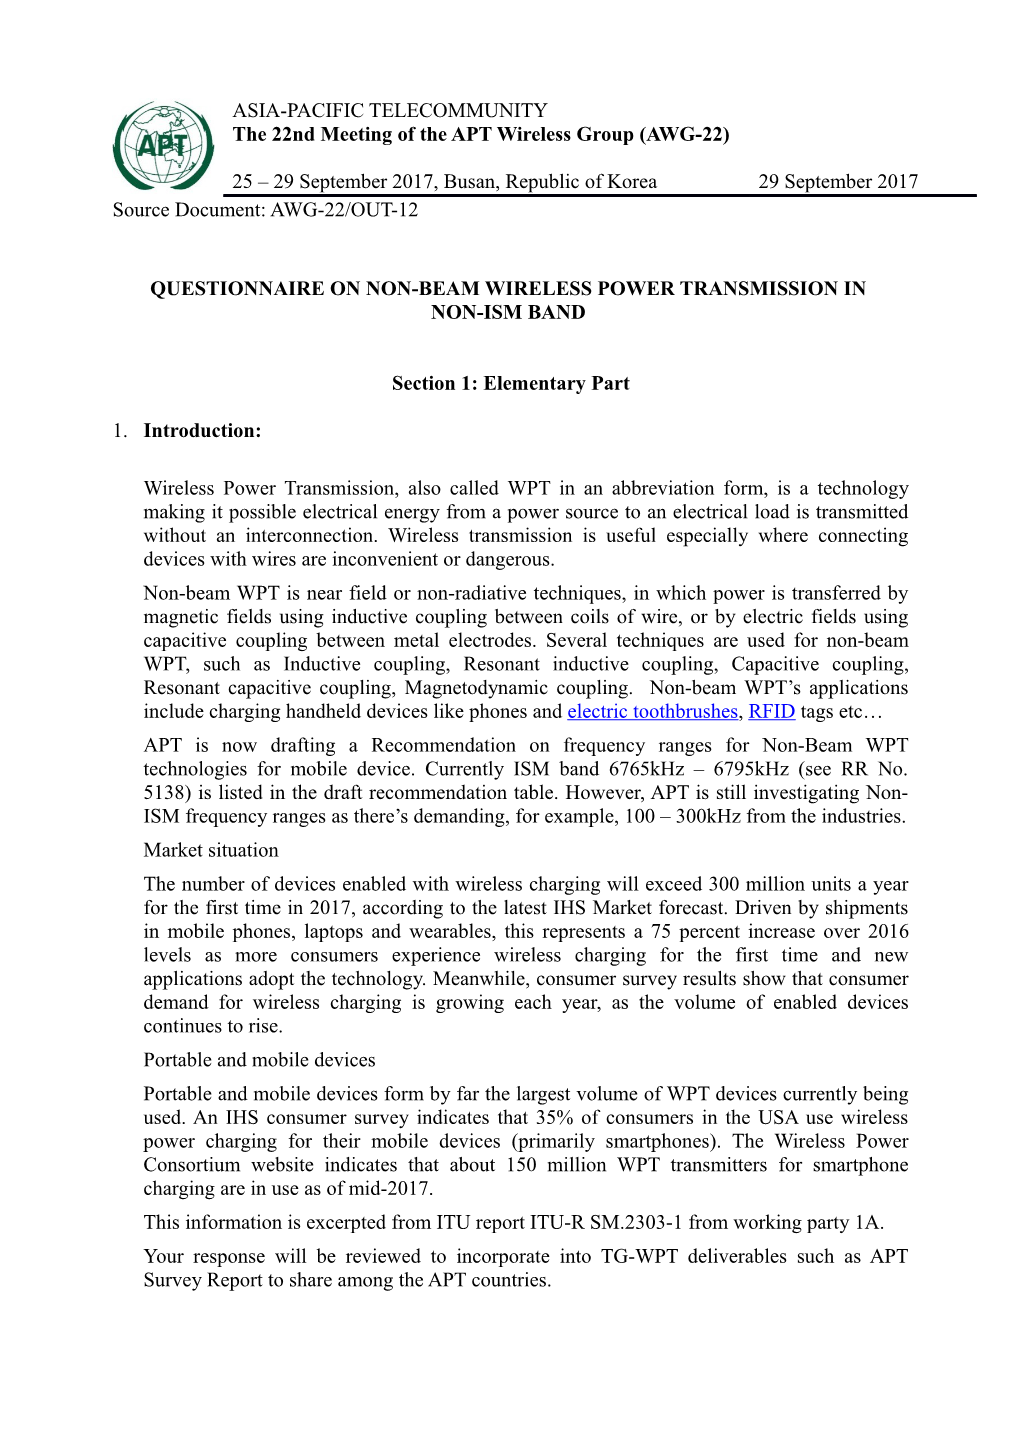 Questionnaire on Non-Beam Wireless Power Transmission In